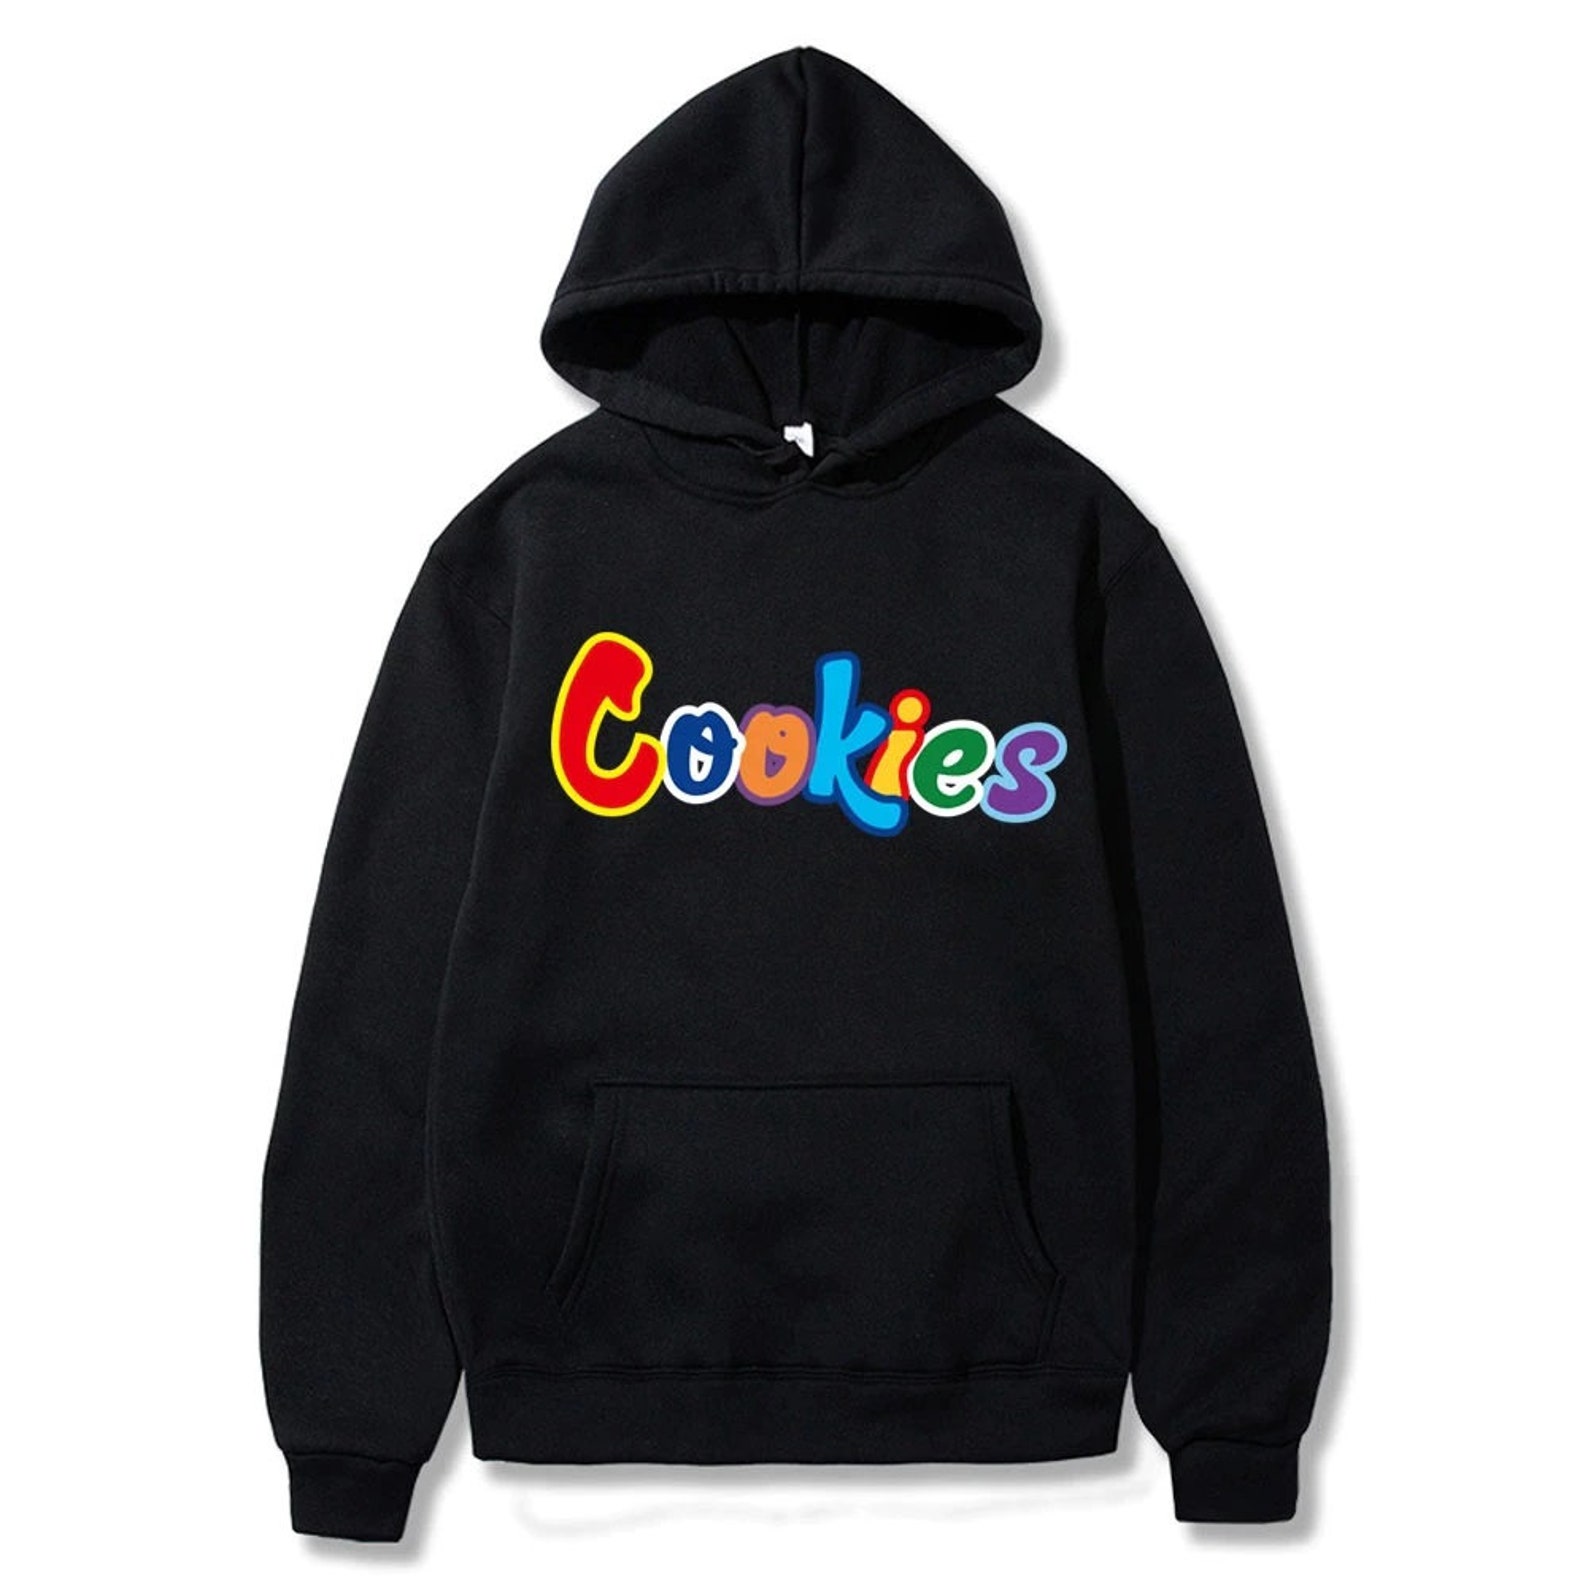 Satisfy your sweet tooth with our cookie-themed Hoodies